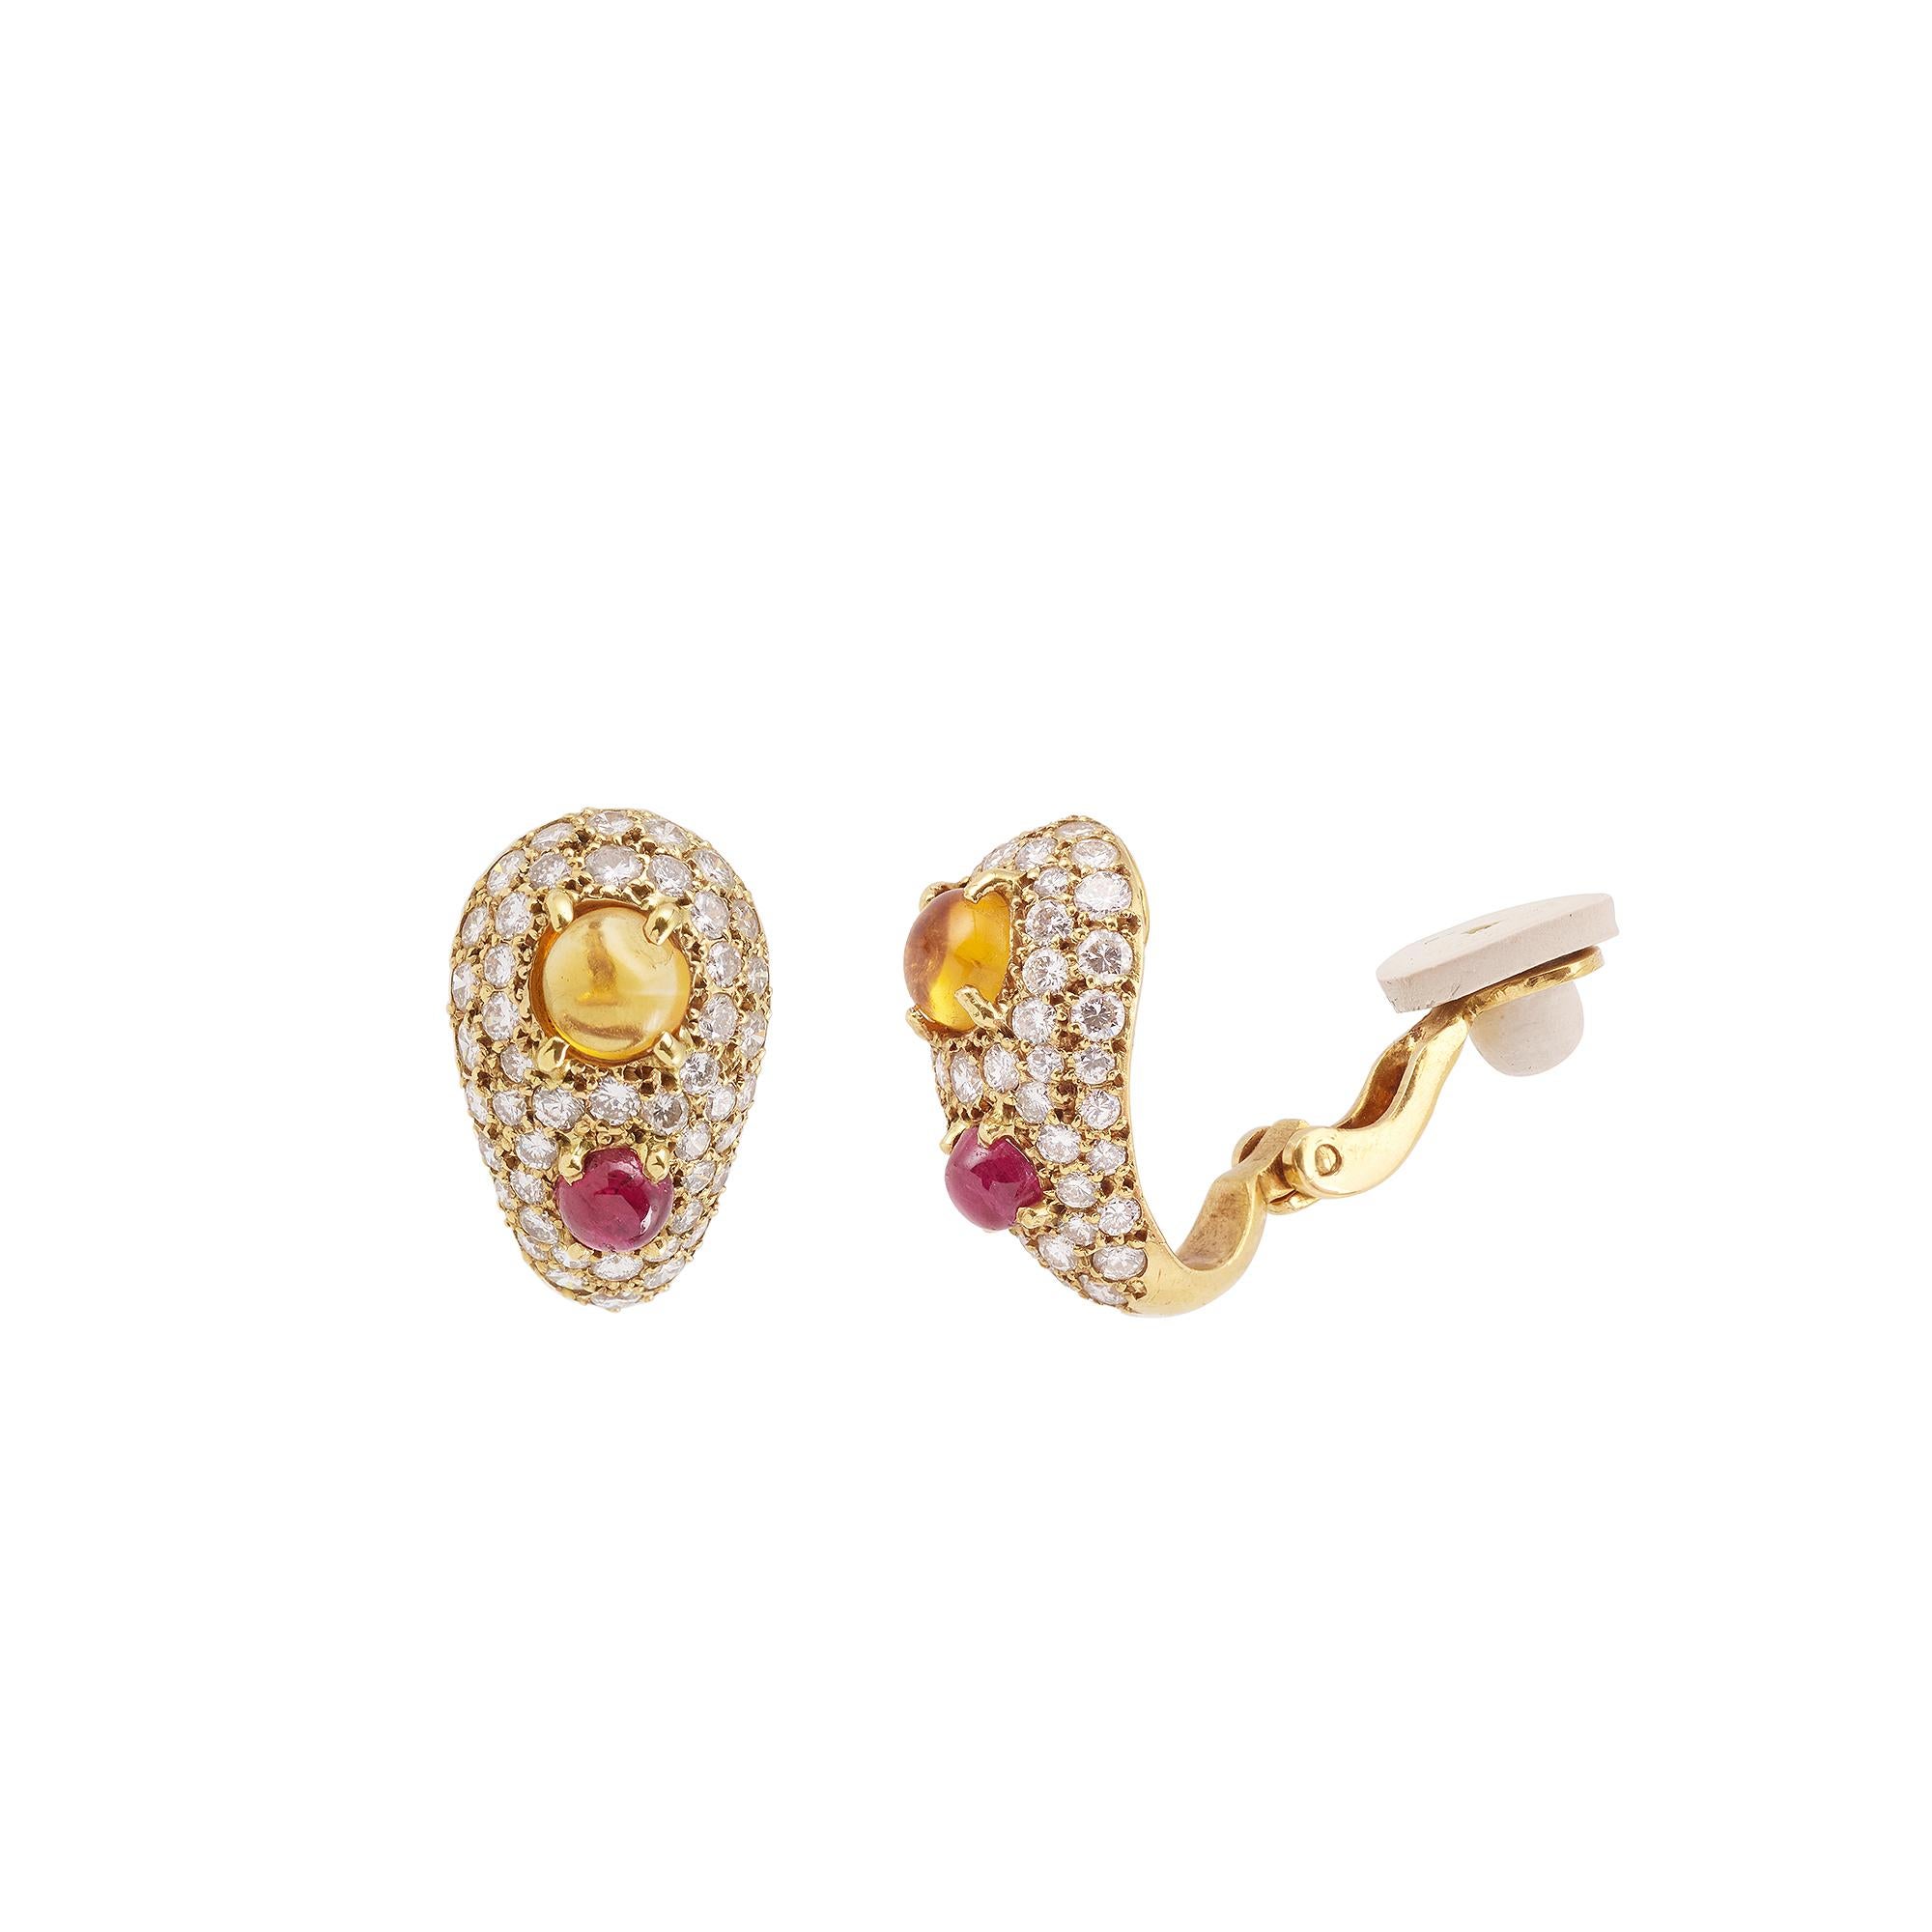 Pair of yellow gold clip earrings set with diamonds and two citrine cabochons and two ruby cabochons.

Total weight of citrines : 0.96 cts

Total weight of rubies : 0.60 cts

Total weight of diamonds : 1.10 carats

Dimensions of the earrings : 1.10